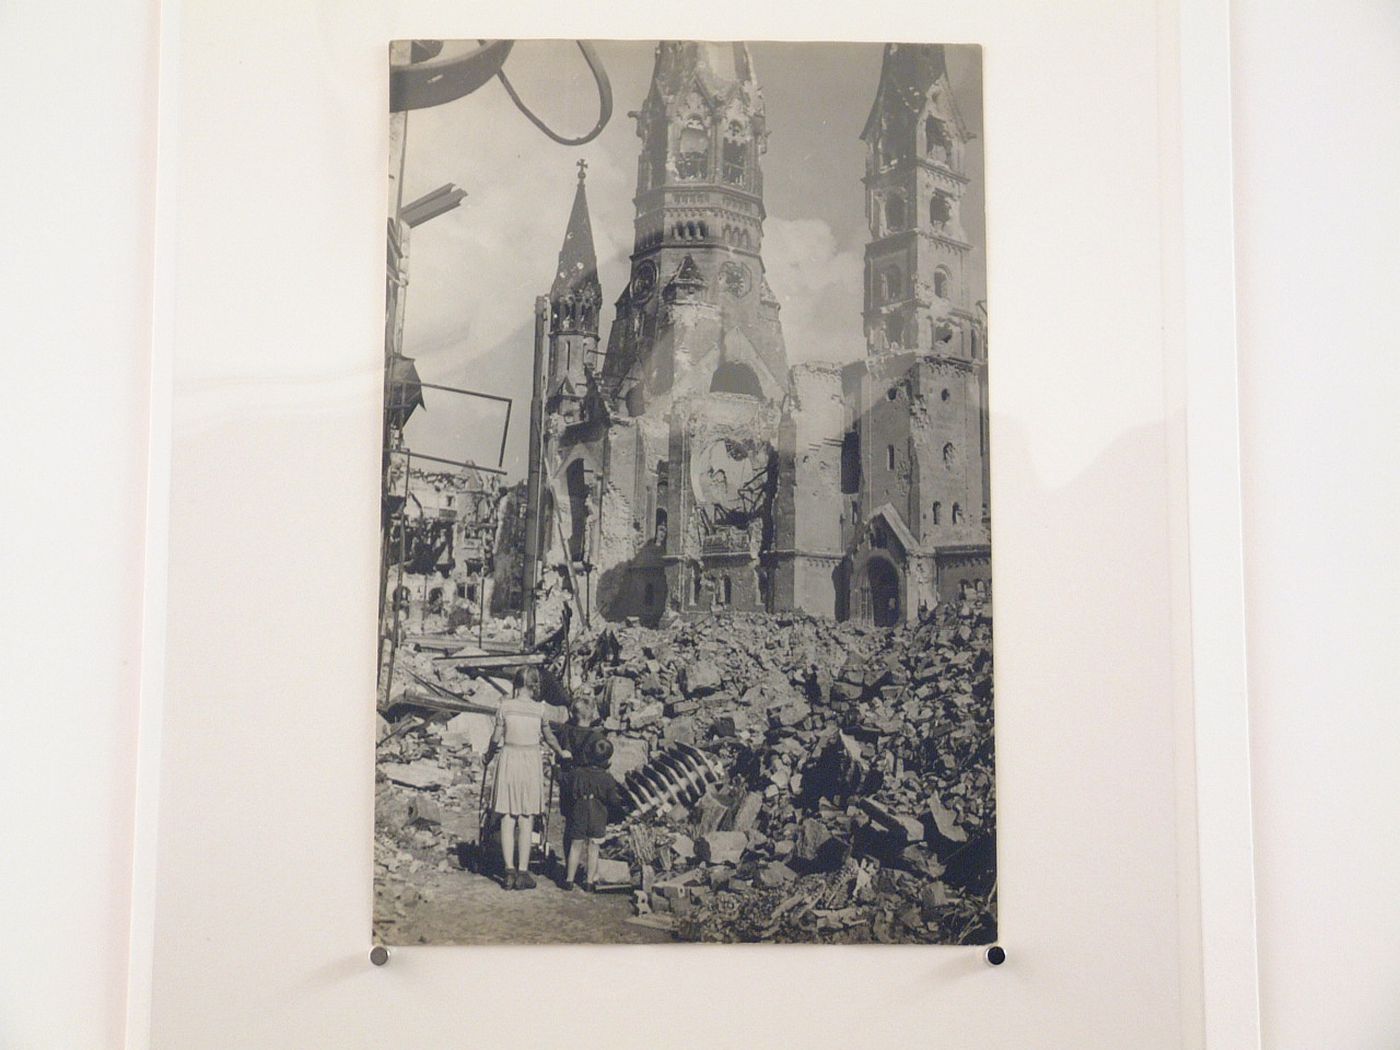 Partially demolished cathedral, ca.1945, Berlin [?], Germany